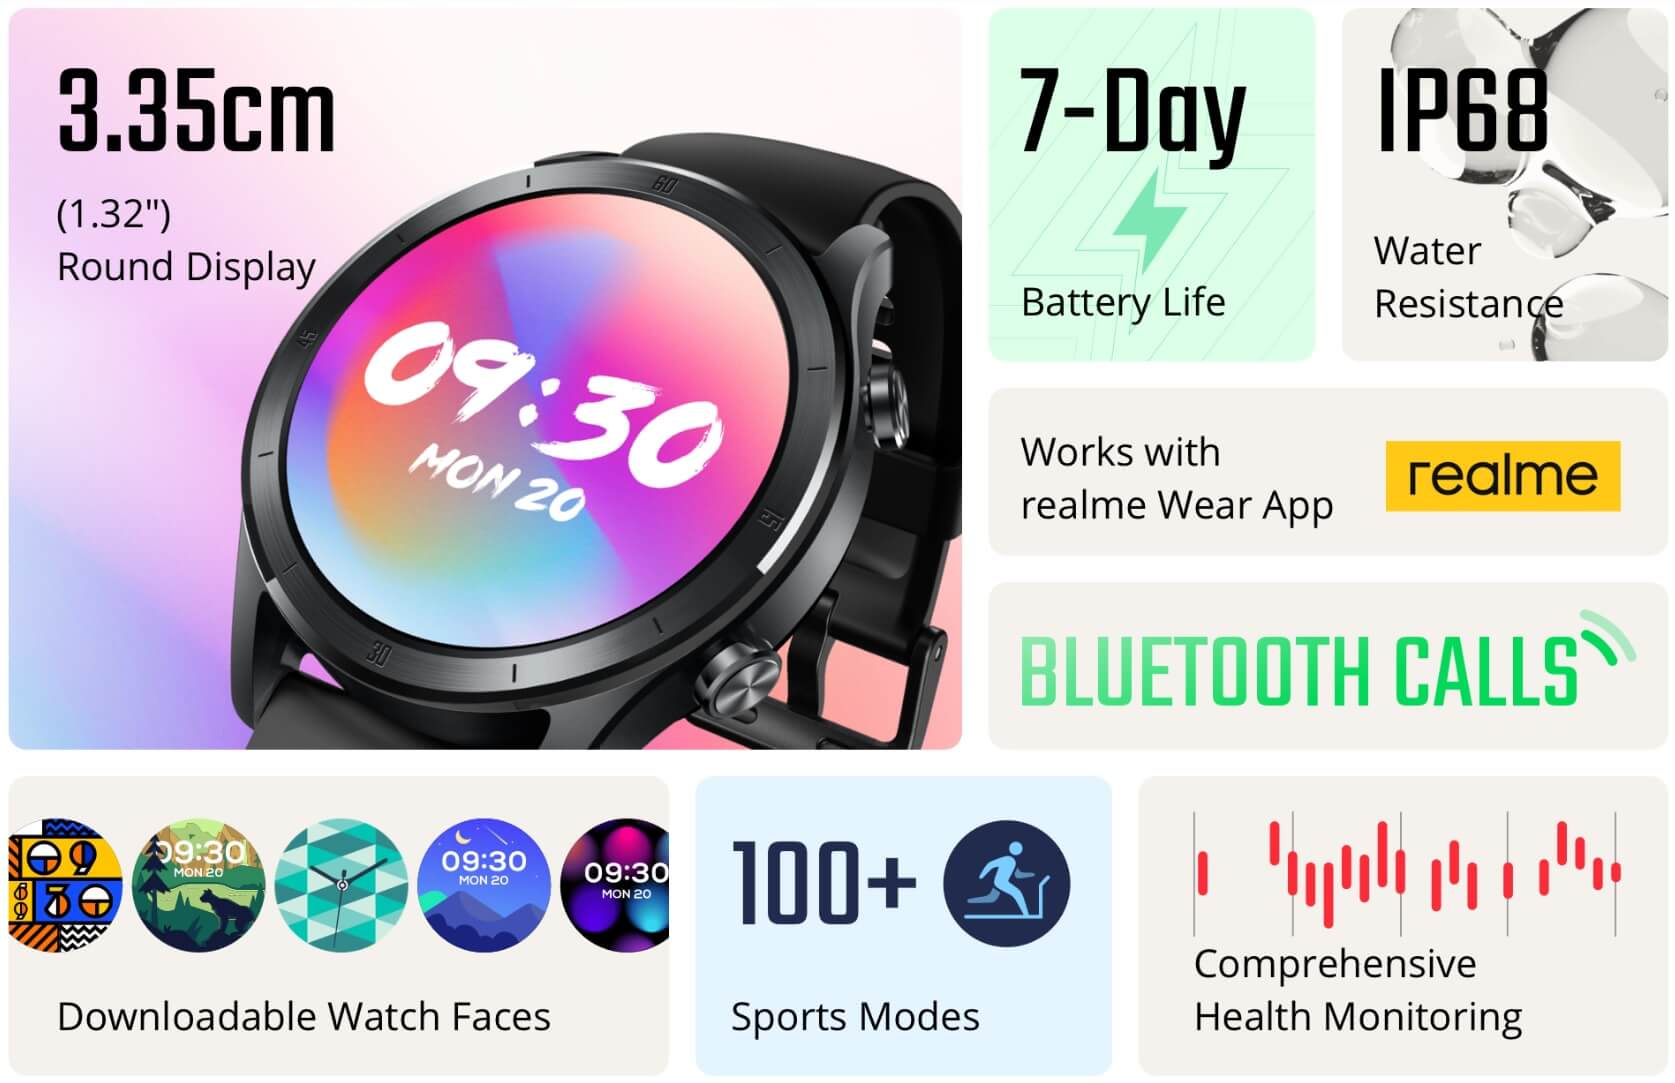 Realme TechLife Watch R100 feature